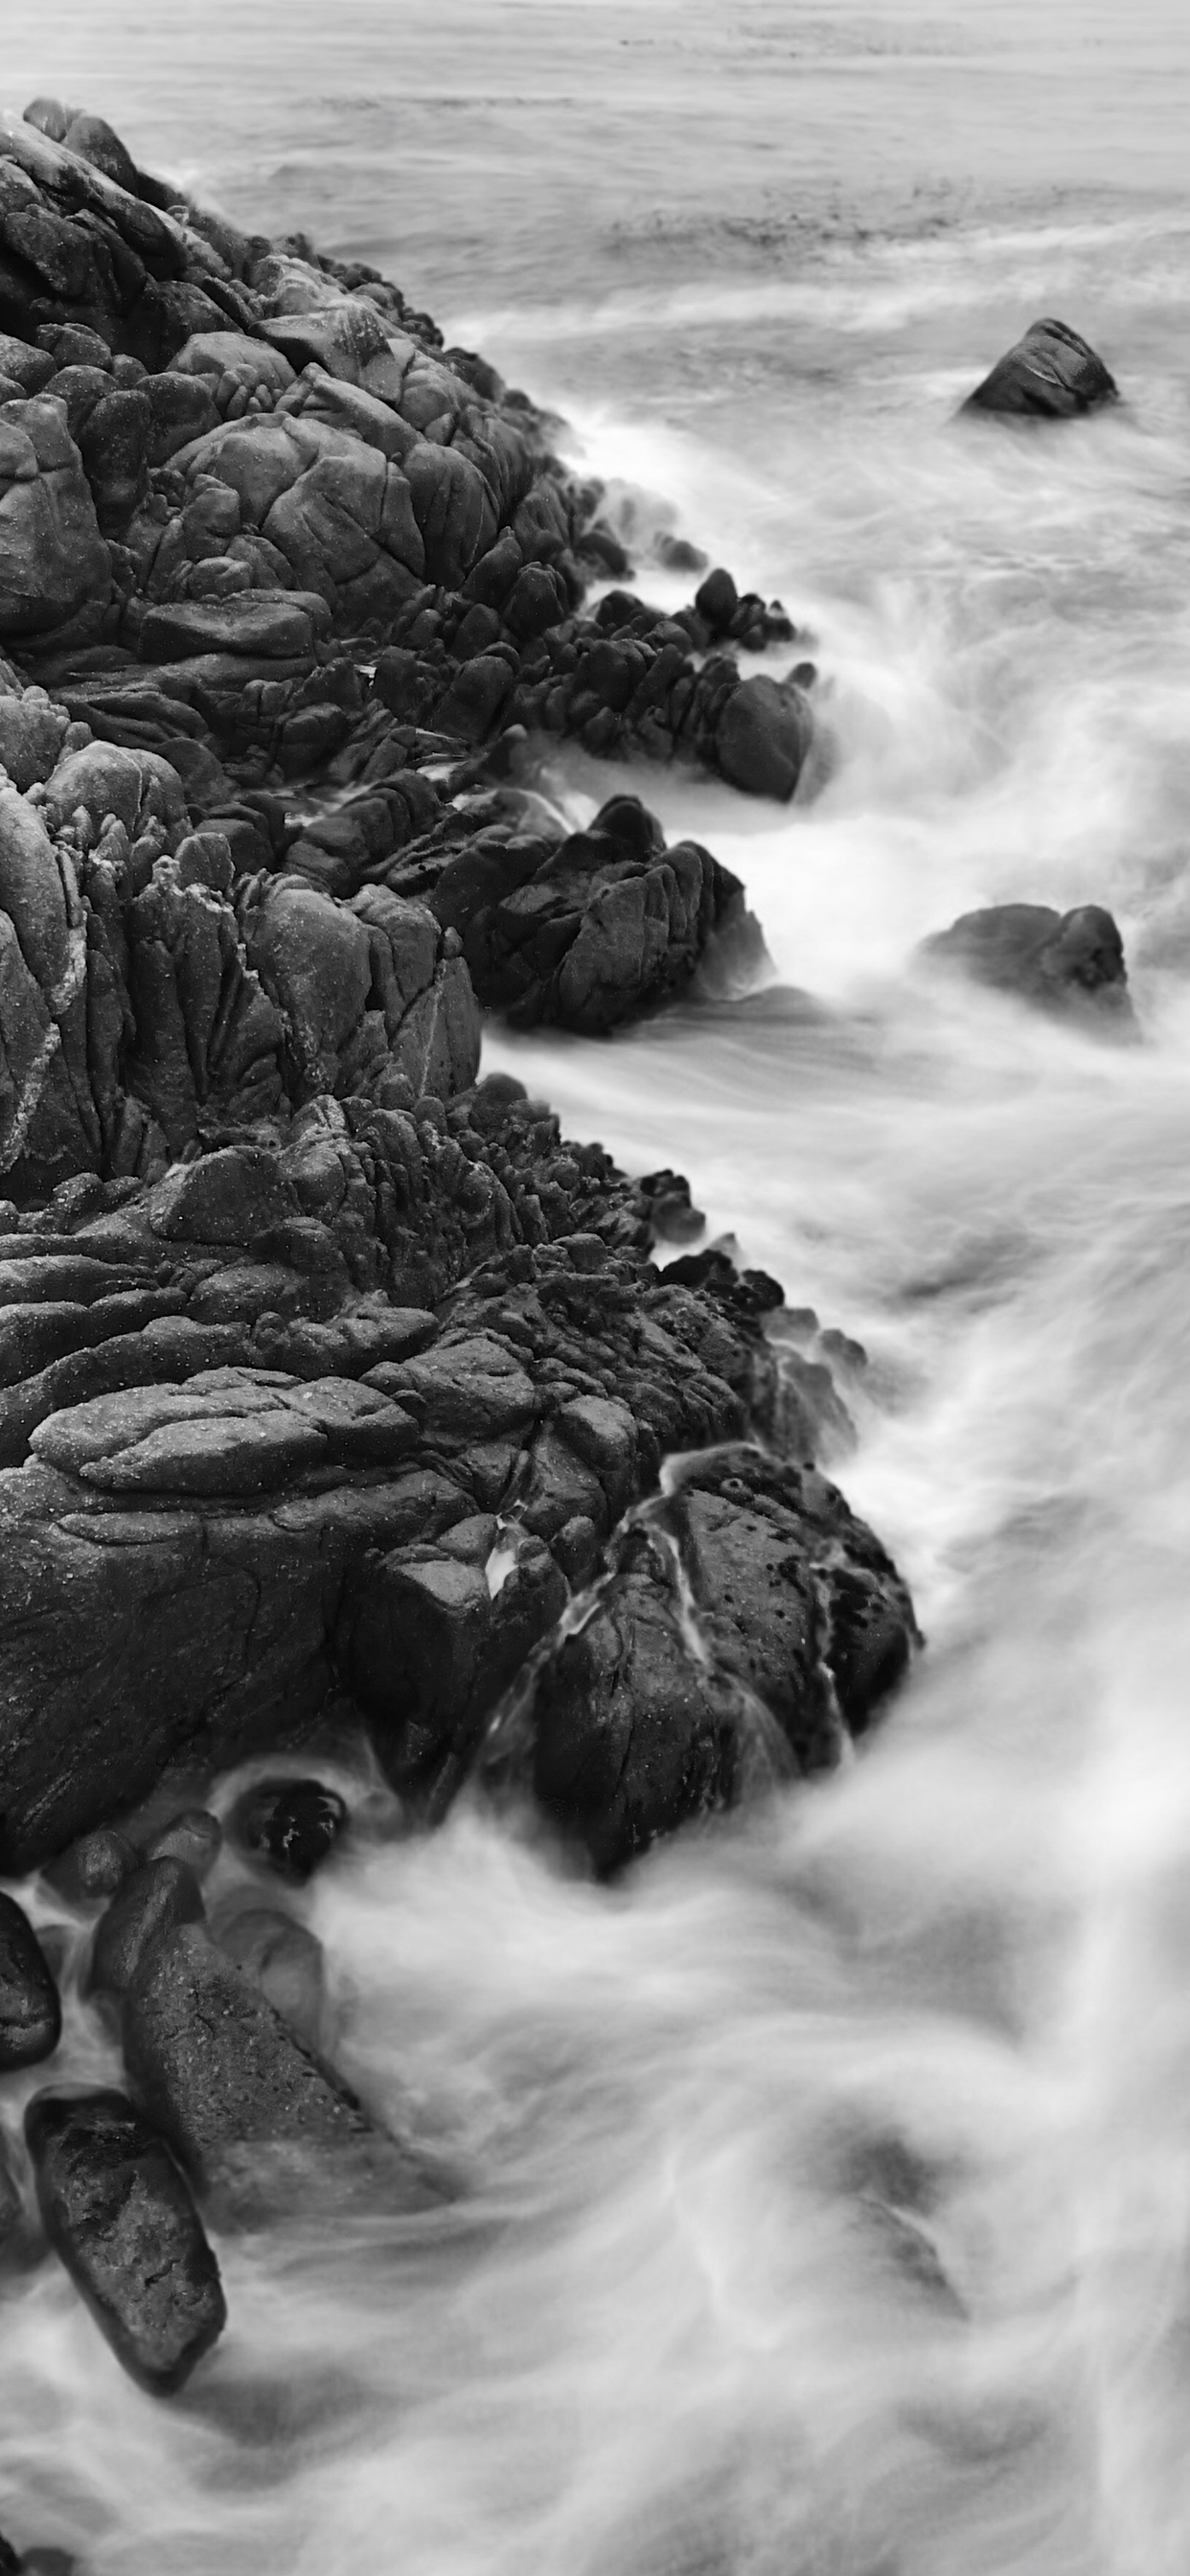 Long Exposure, Motion, And Water Wallpaper For iPhone Wallpaper